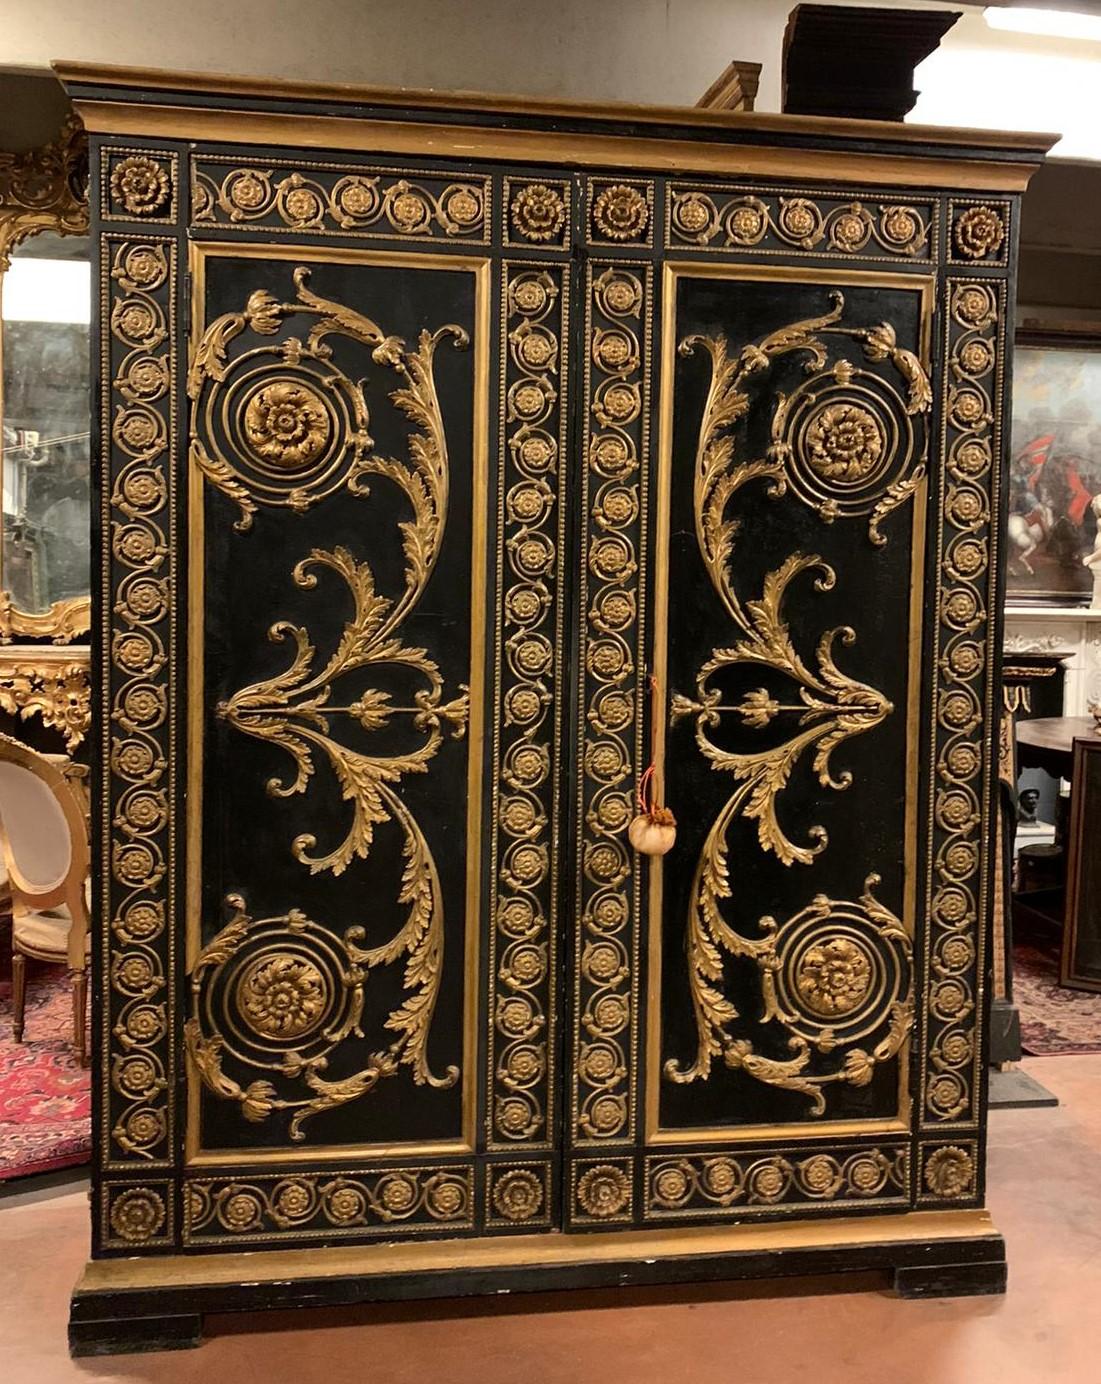 Antique wardrobe or large cabinet in richly carved wood, hand-lacquered on a black background and gilded in the sculptures, built entirely by hand in the 19th century in Italy.
It has a back in less noble and posthumous wood, but still retains the